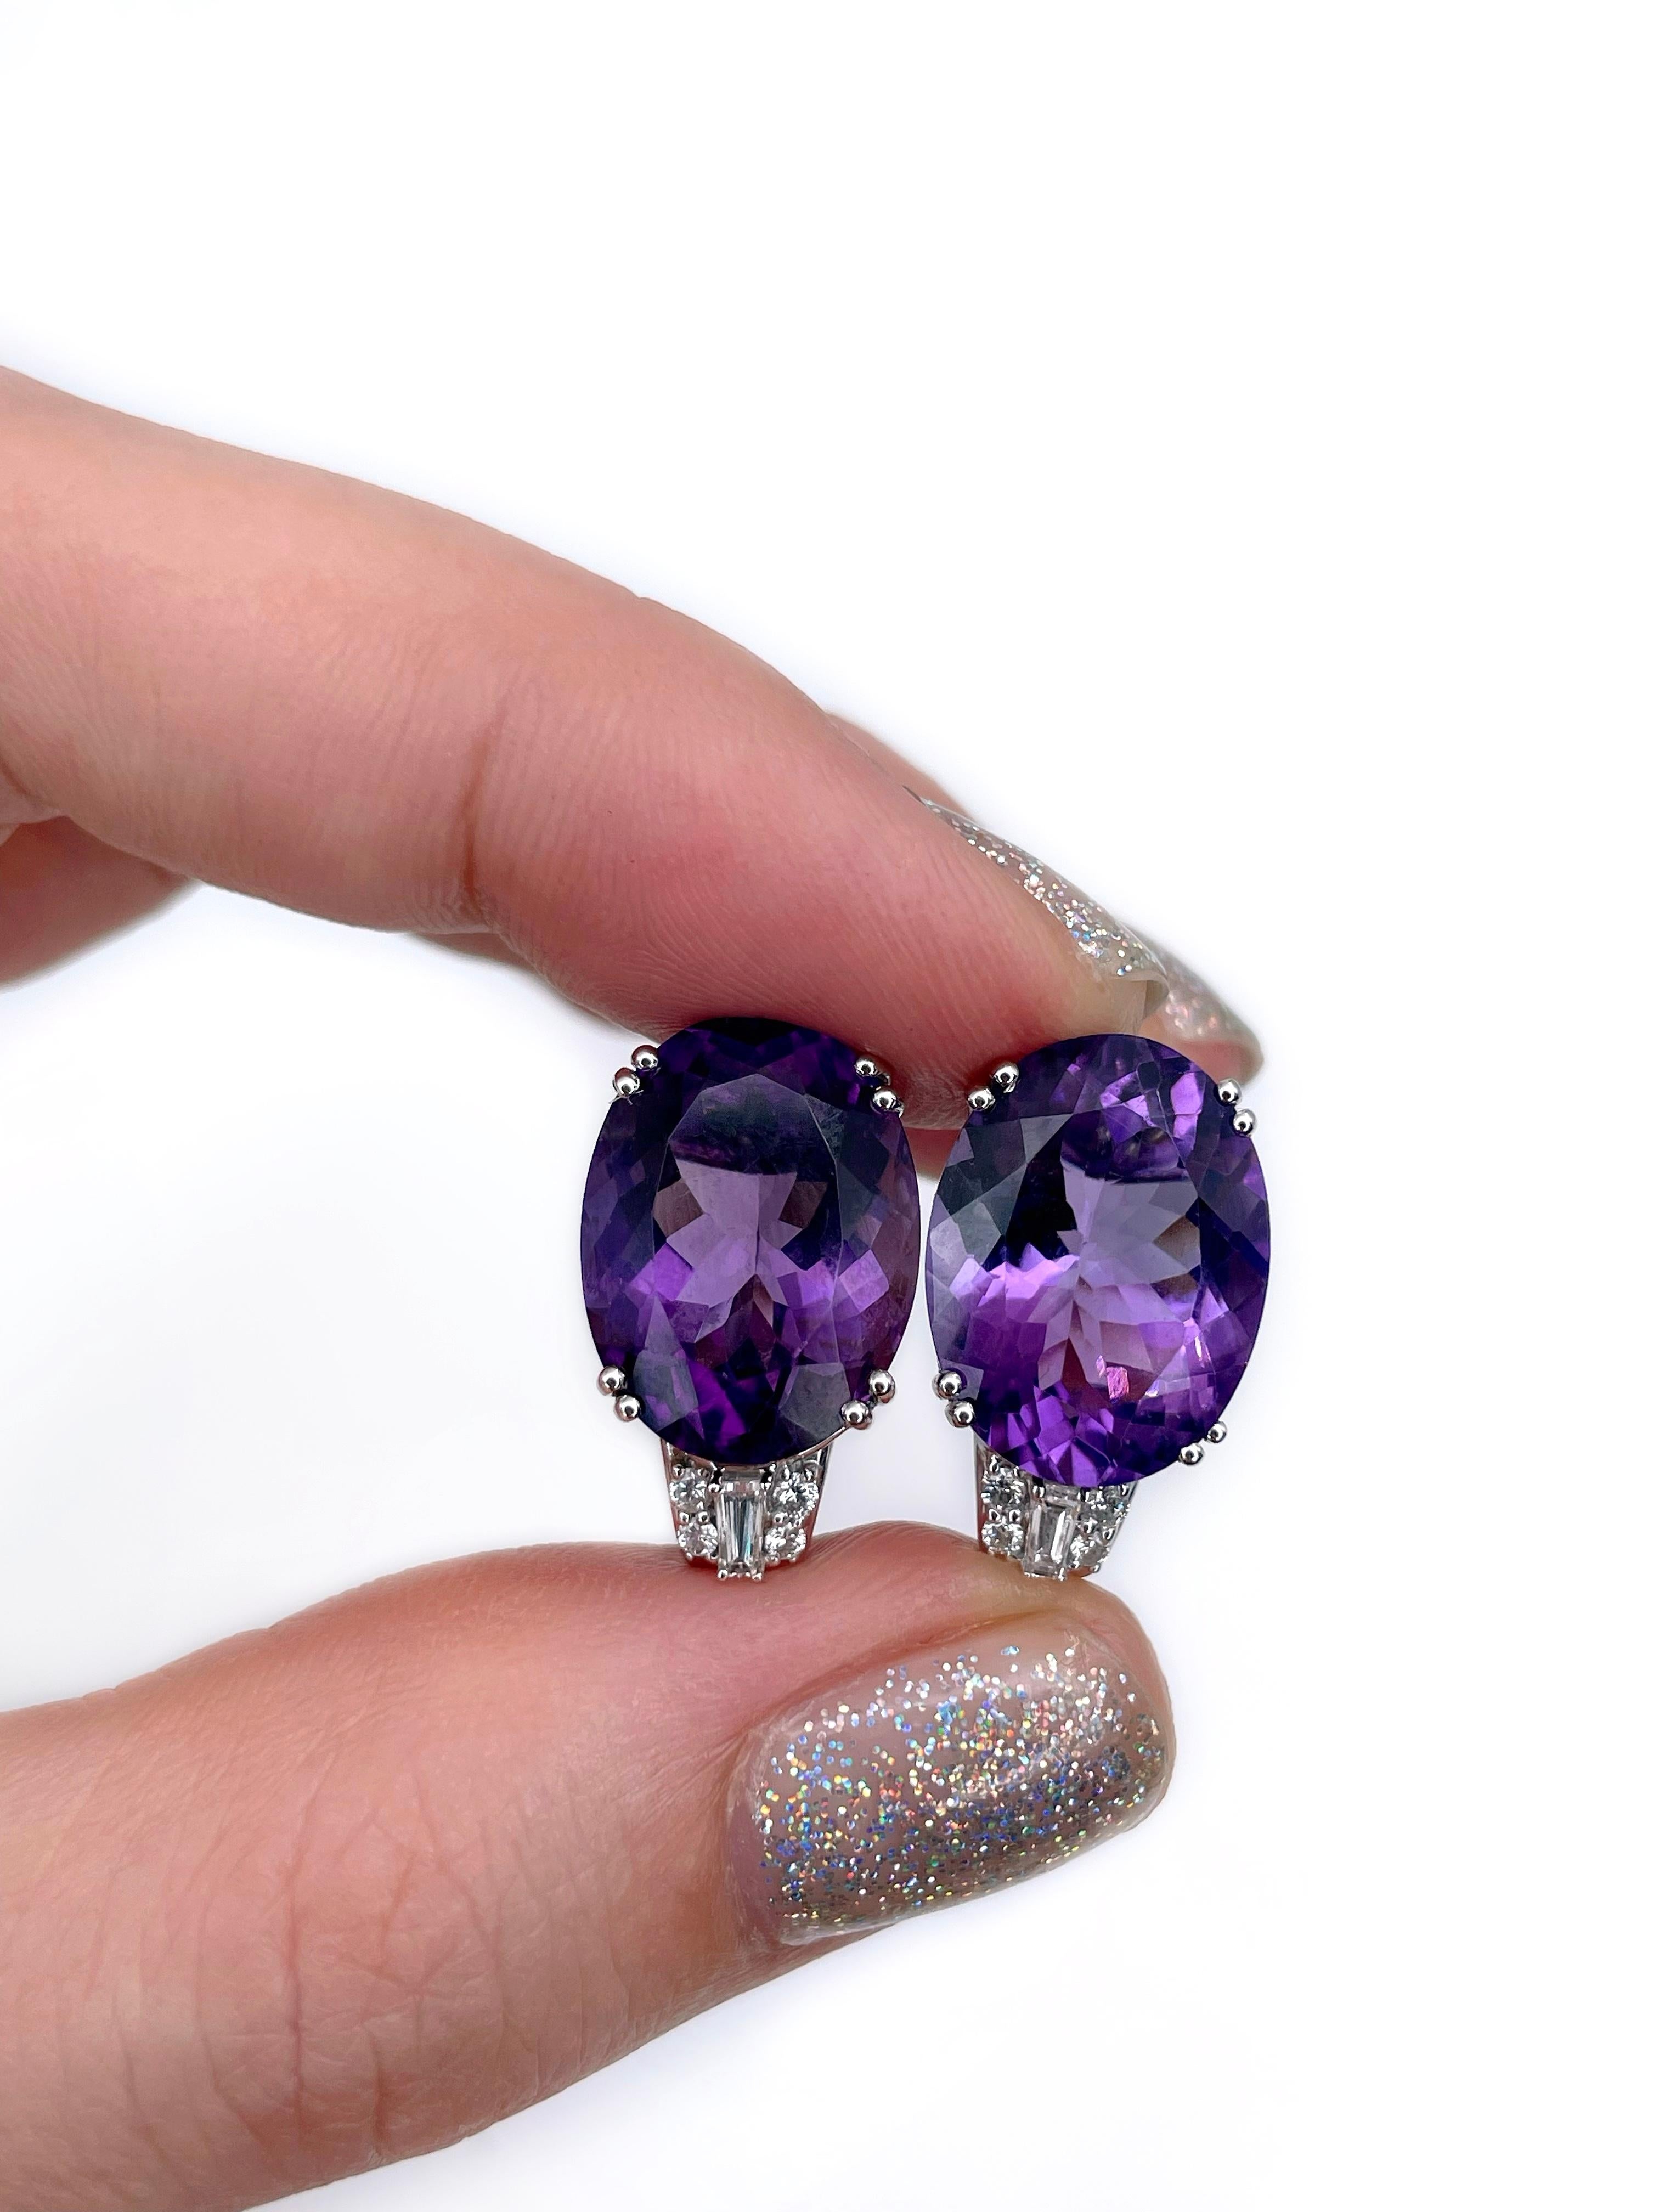 This is a stunning pair of stud earrings crafted in 18K white gold. The piece features 2 oval amethysts. The gems are paired with diamonds: 
- 8pcs., round brilliant cut, 0.11ct, RW-W, VS-SI
- 2pcs., trapeze cut, 0.10ct, RW-W, VS

Weight: 7.94g